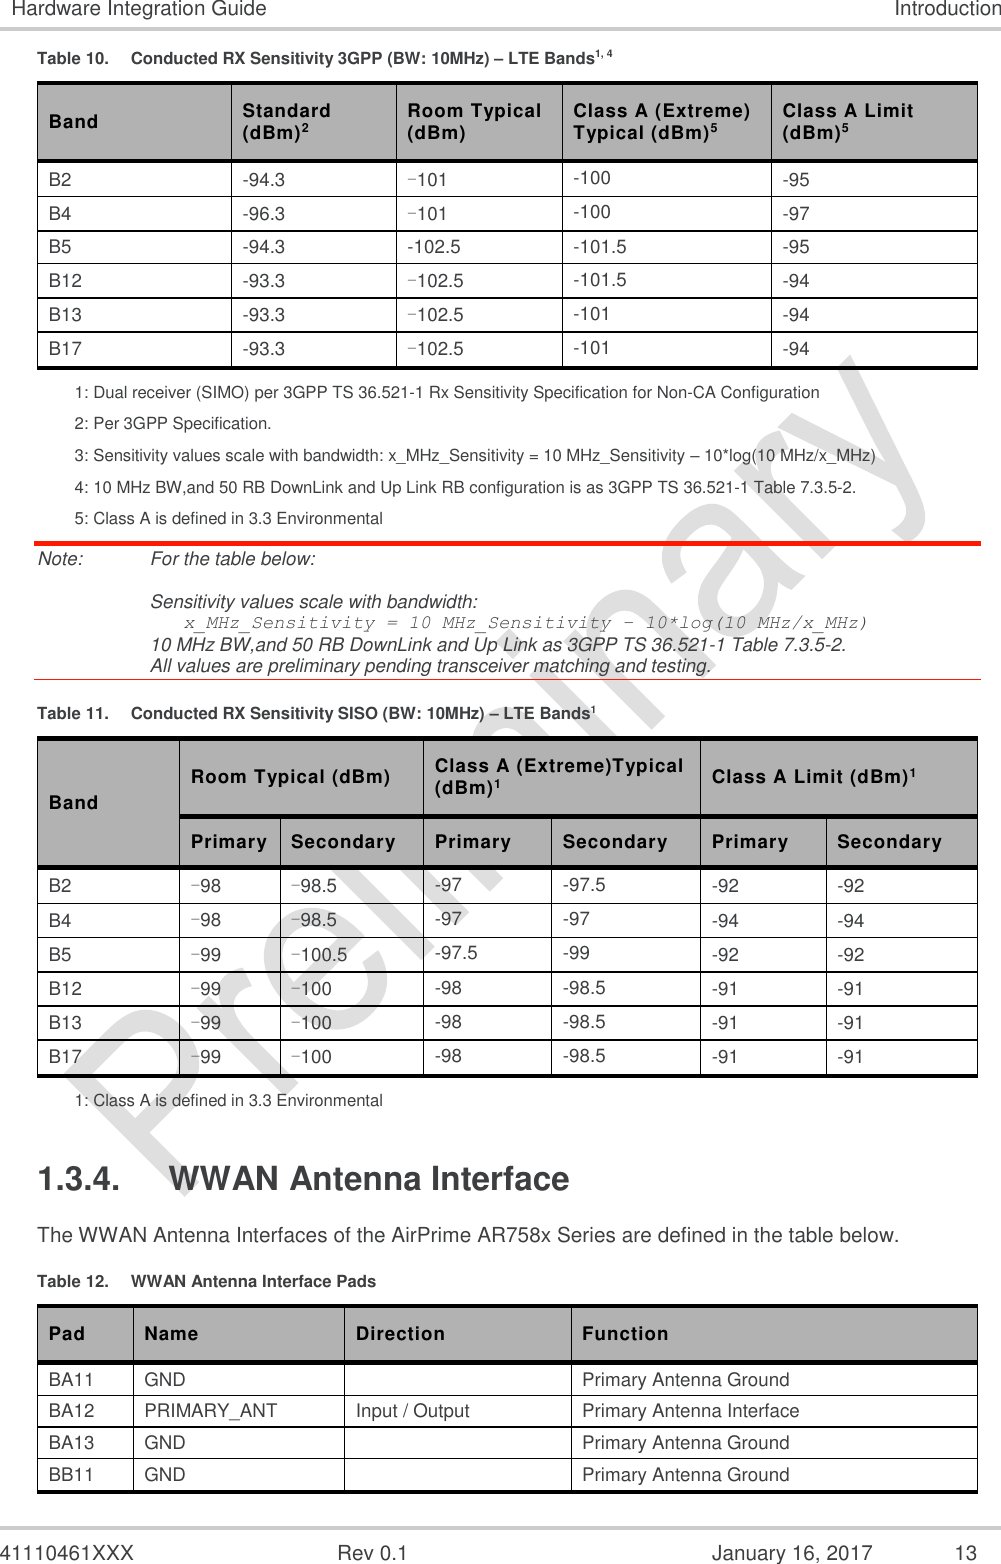  41110461XXX  Rev 0.1  January 16, 2017  13 Hardware Integration Guide Introduction Table 10.  Conducted RX Sensitivity 3GPP (BW: 10MHz) – LTE Bands1, 4 Band Standard (dBm)2 Room Typical (dBm) Class A (Extreme) Typical (dBm)5 Class A Limit  (dBm)5 B2 -94.3 -101 -100 -95 B4 -96.3 -101 -100 -97 B5 -94.3 -102.5 -101.5 -95 B12 -93.3 -102.5 -101.5 -94 B13 -93.3 -102.5 -101 -94 B17 -93.3 -102.5 -101 -94 1: Dual receiver (SIMO) per 3GPP TS 36.521-1 Rx Sensitivity Specification for Non-CA Configuration 2: Per 3GPP Specification. 3: Sensitivity values scale with bandwidth: x_MHz_Sensitivity = 10 MHz_Sensitivity – 10*log(10 MHz/x_MHz) 4: 10 MHz BW,and 50 RB DownLink and Up Link RB configuration is as 3GPP TS 36.521-1 Table 7.3.5-2. 5: Class A is defined in 3.3 Environmental Note:   For the table below:  Sensitivity values scale with bandwidth:    x_MHz_Sensitivity = 10 MHz_Sensitivity – 10*log(10 MHz/x_MHz) 10 MHz BW,and 50 RB DownLink and Up Link as 3GPP TS 36.521-1 Table 7.3.5-2. All values are preliminary pending transceiver matching and testing. Table 11.  Conducted RX Sensitivity SISO (BW: 10MHz) – LTE Bands1 Band Room Typical (dBm) Class A (Extreme)Typical (dBm)1 Class A Limit (dBm)1 Primary Secondary Primary Secondary Primary Secondary B2 -98 -98.5 -97 -97.5 -92 -92 B4 -98 -98.5 -97 -97 -94 -94 B5 -99 -100.5 -97.5 -99 -92 -92 B12 -99 -100 -98 -98.5 -91 -91 B13 -99 -100 -98 -98.5 -91 -91 B17 -99 -100 -98 -98.5 -91 -91 1: Class A is defined in 3.3 Environmental 1.3.4.  WWAN Antenna Interface The WWAN Antenna Interfaces of the AirPrime AR758x Series are defined in the table below. Table 12.  WWAN Antenna Interface Pads Pad Name Direction Function BA11 GND   Primary Antenna Ground BA12 PRIMARY_ANT Input / Output Primary Antenna Interface BA13 GND   Primary Antenna Ground BB11 GND   Primary Antenna Ground 